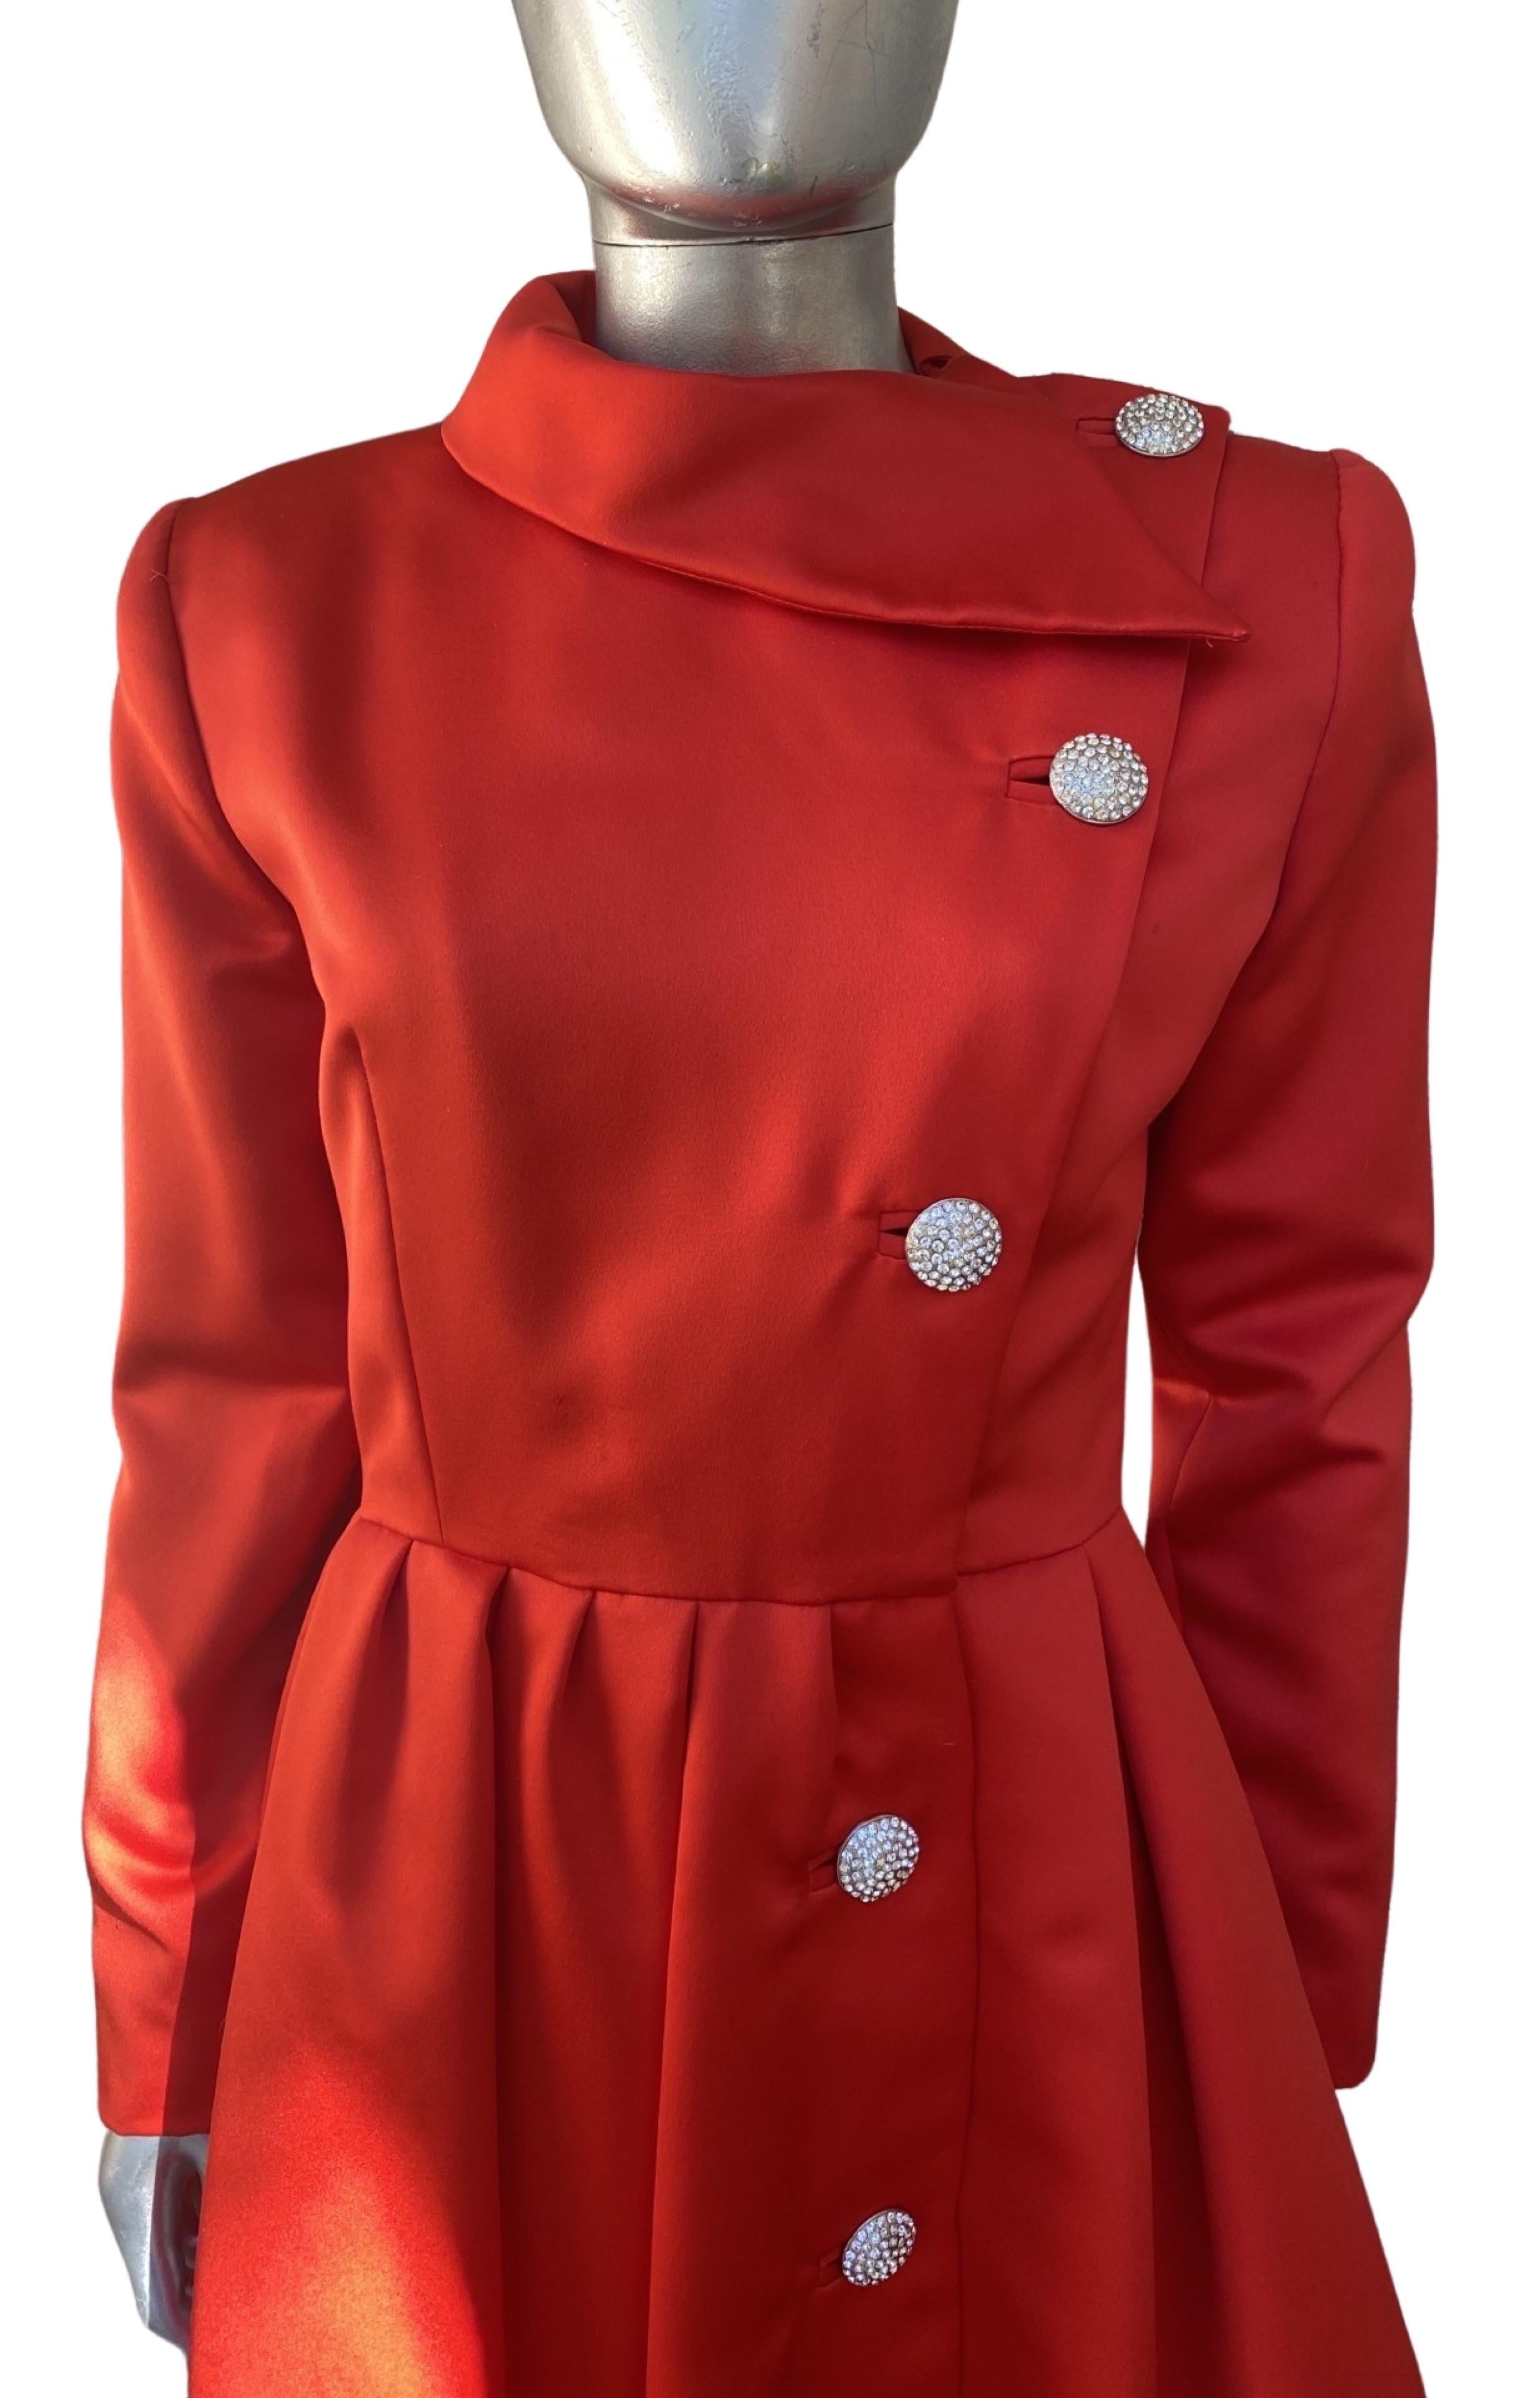 Red Satin and Rhinestone Button Coat Dress by Victor Costa Neiman Marcus Size 8 For Sale 5